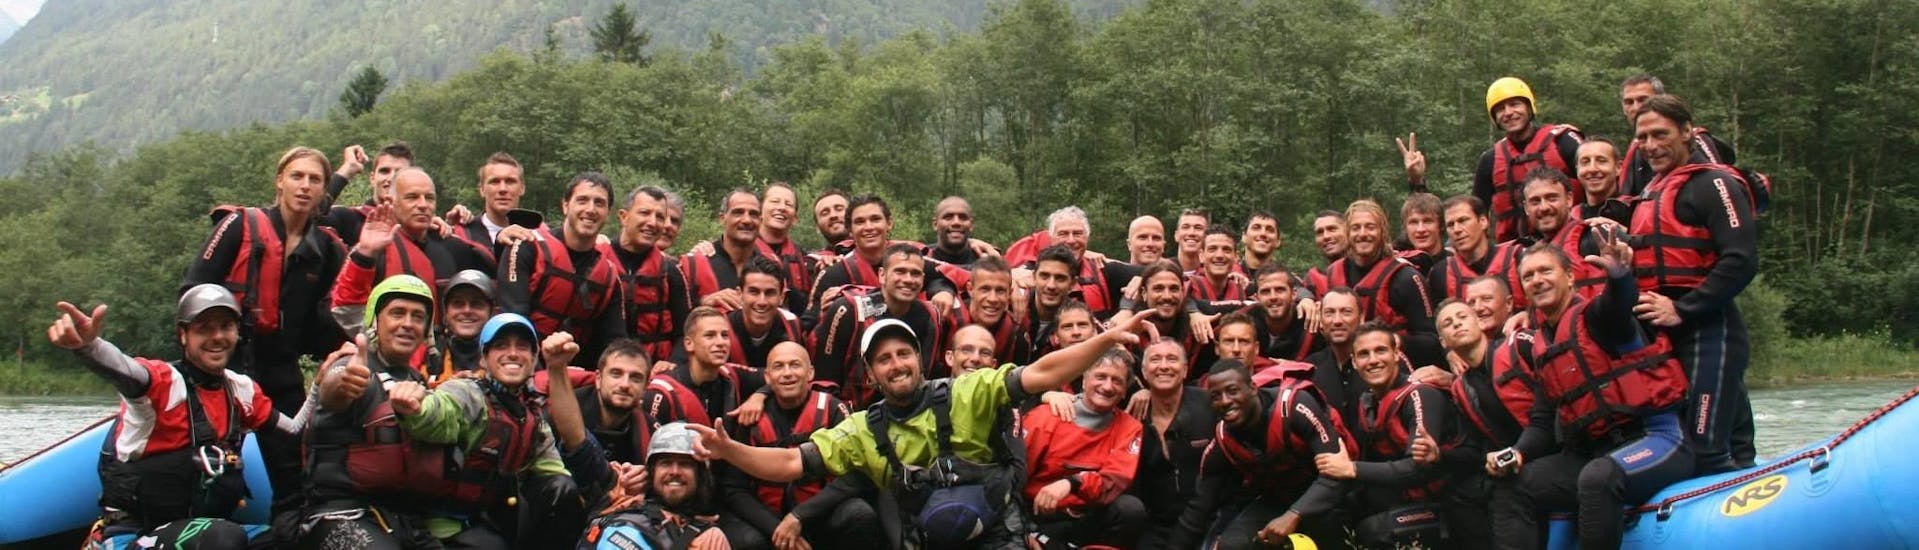 Group picture of the people enjoying the Rafting on the Rienza River in Val Pusteria - Short Tour with Club Activ Campo Tures.